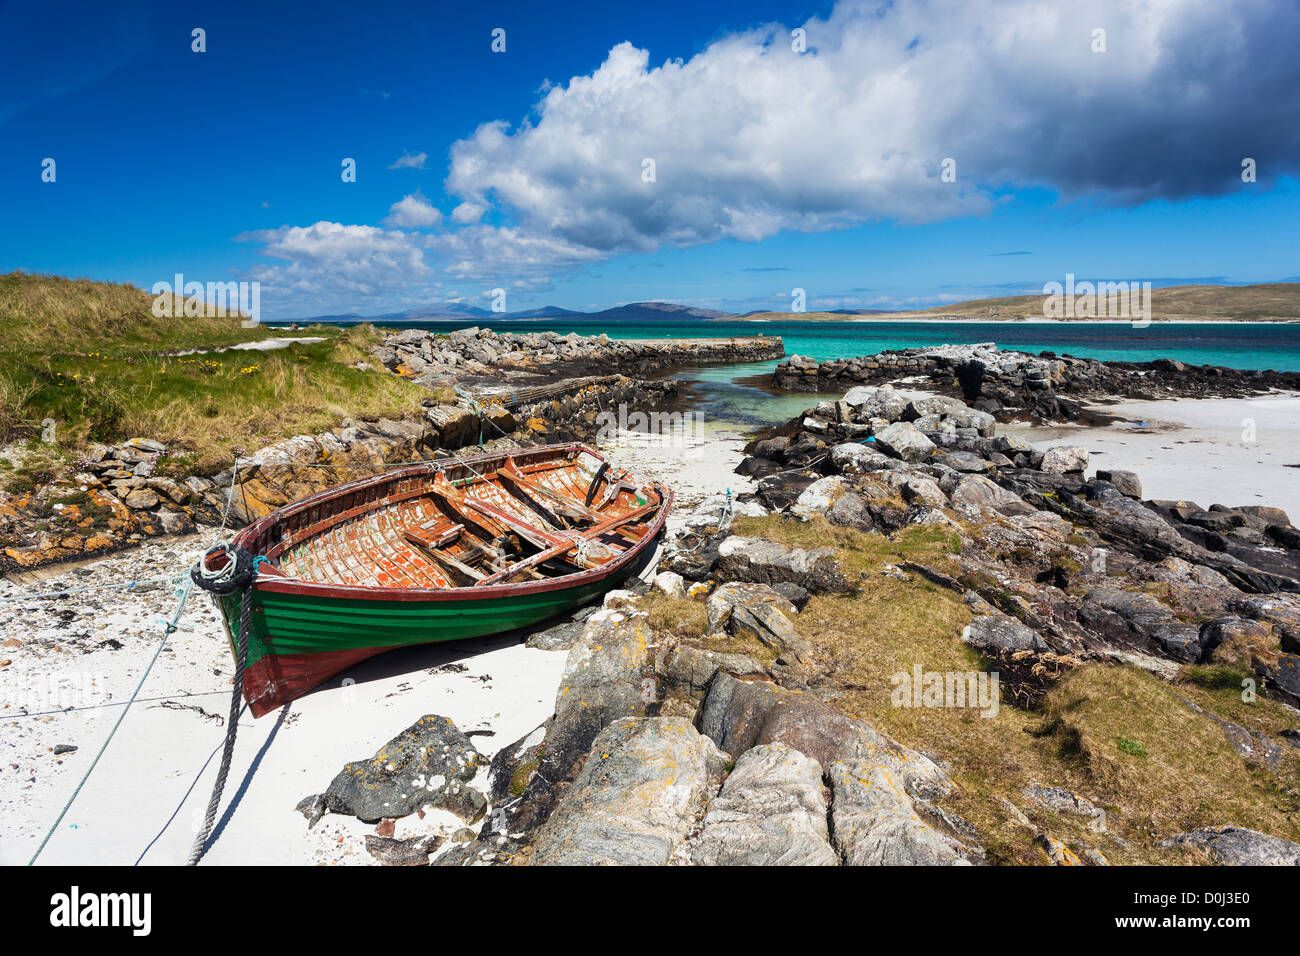 A view of a boat moored in an inlet at Eoligarry Pier. Stock Photo